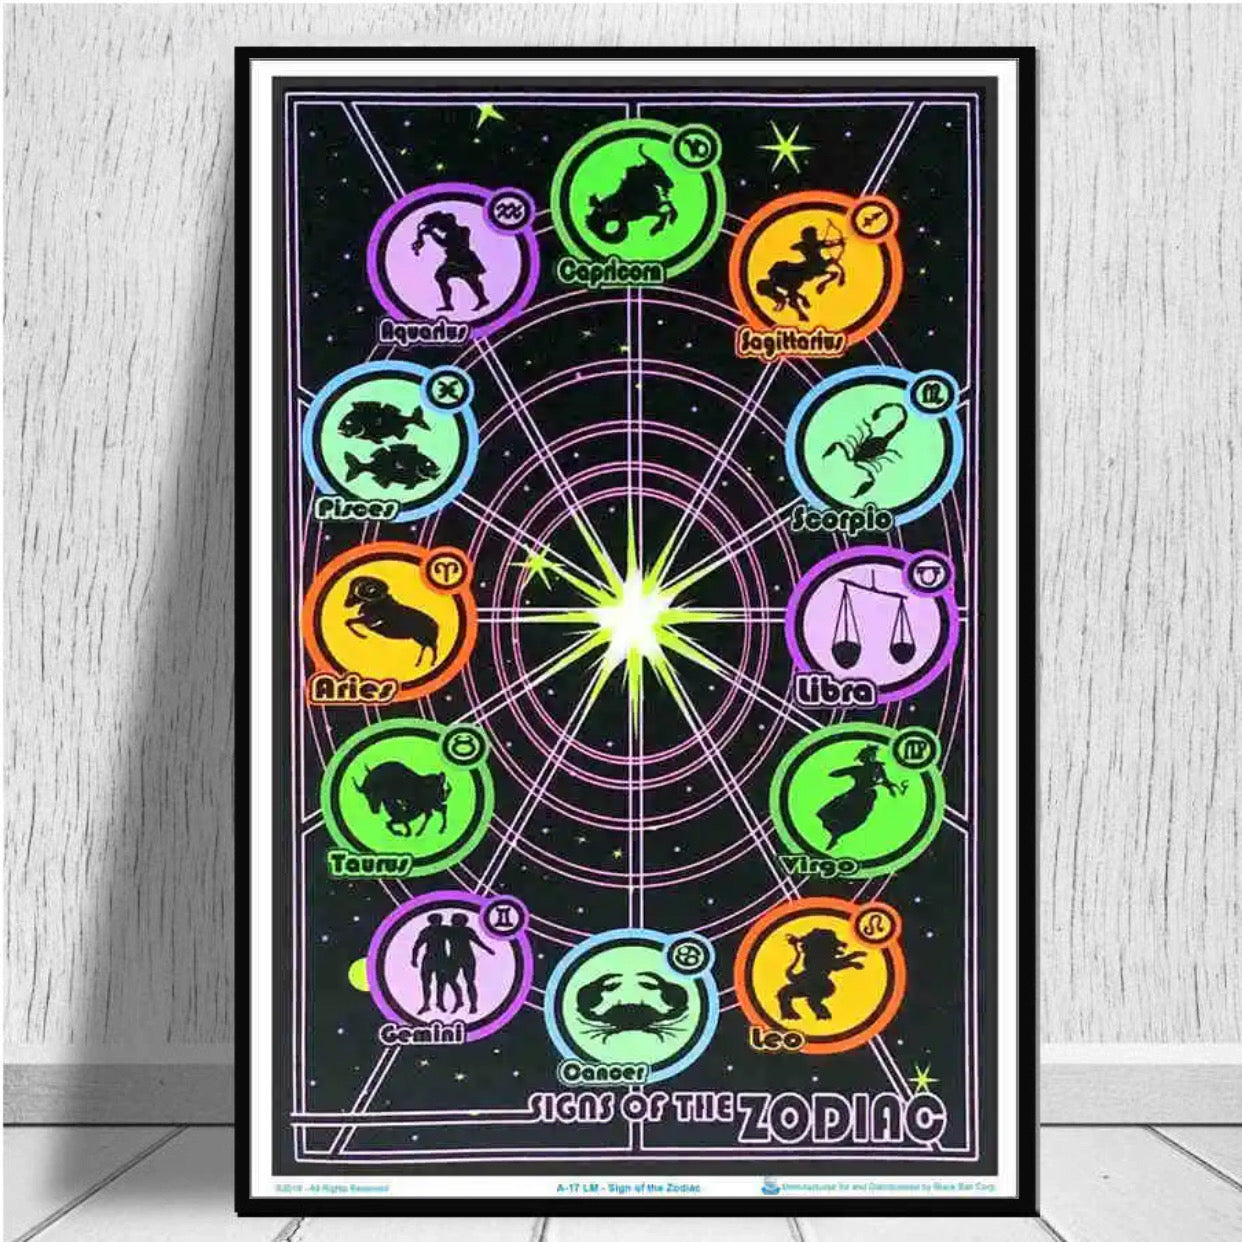 " signs of the zodiac" poster